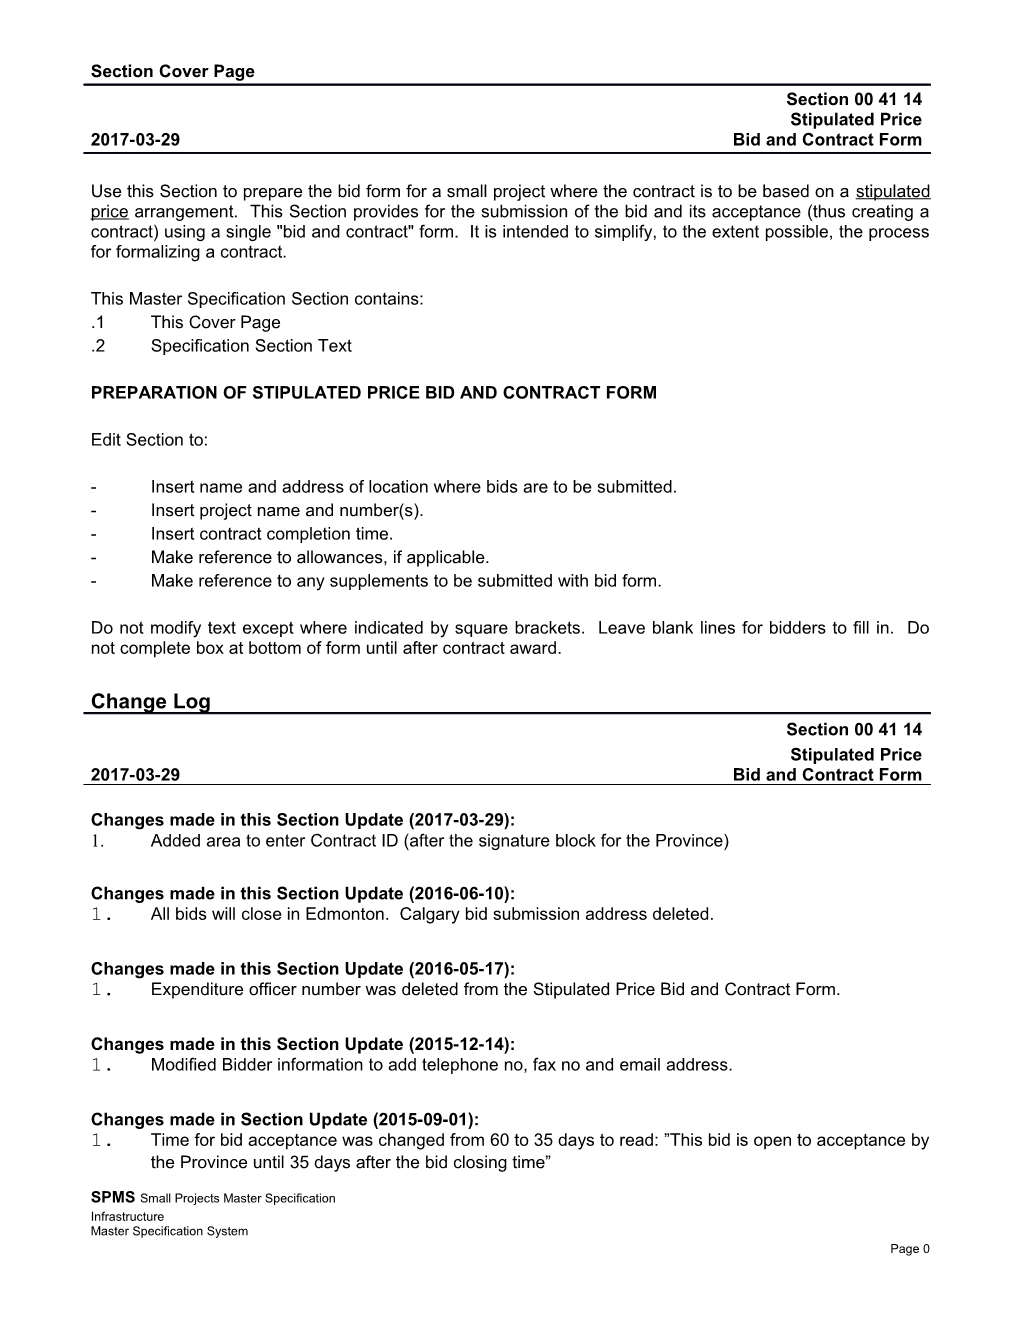 00 41 14 (00413) - Stipulated Price Bid and Contract Form